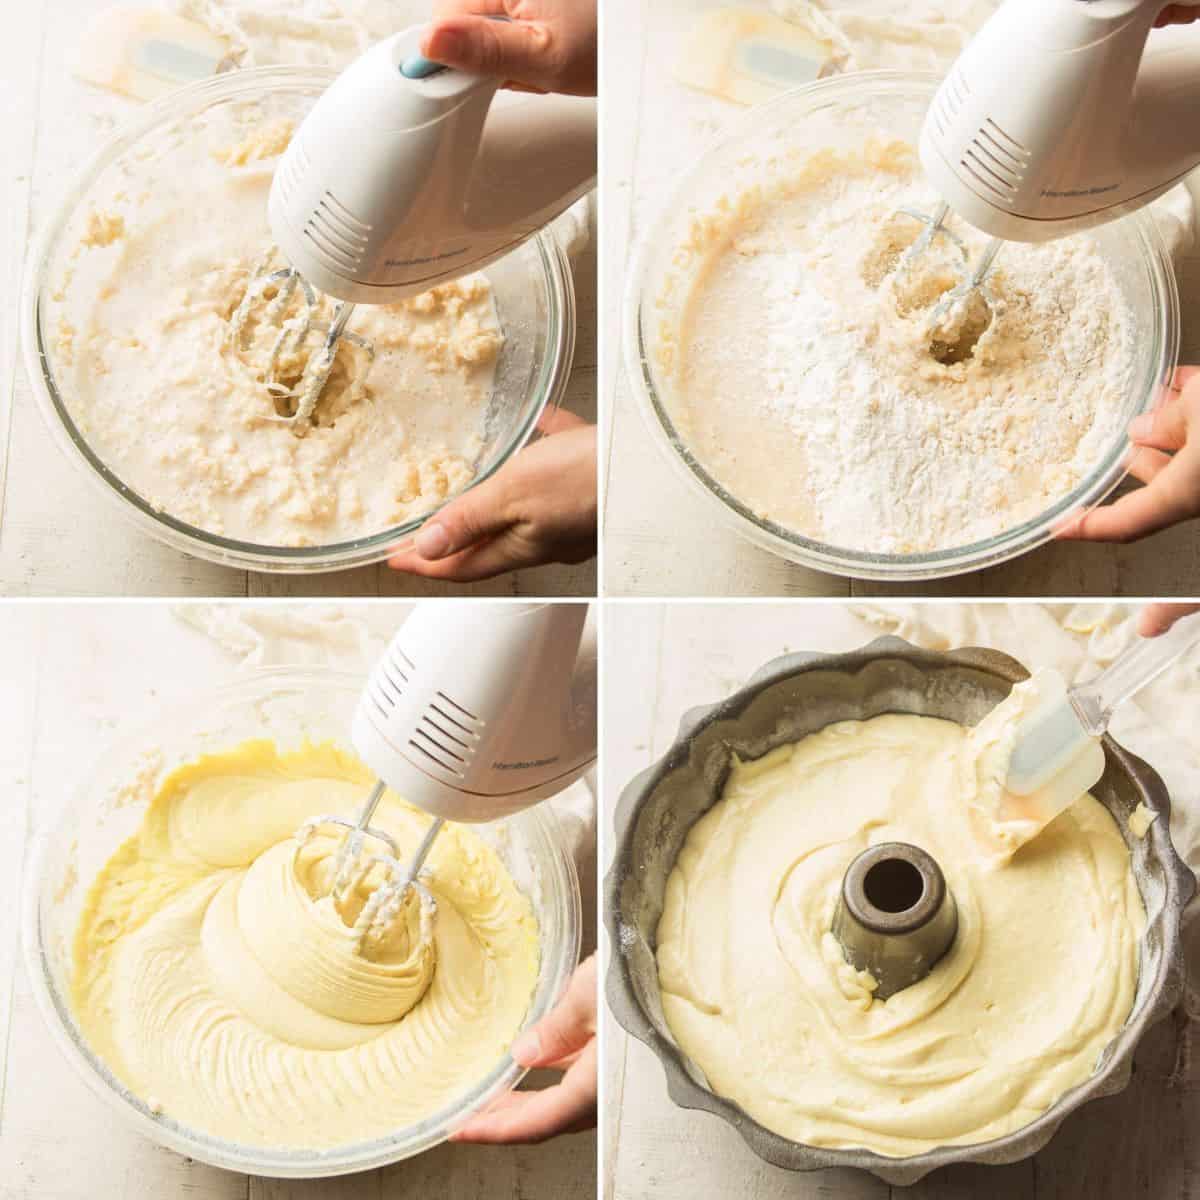 Collage Showing Steps 5-8 for Making Vegan Lemon Cake: Beat Liquid Ingredients Into Batter, Beat with Mixer, Beat in Food Color, and Transfer Batter to Bundt Pan